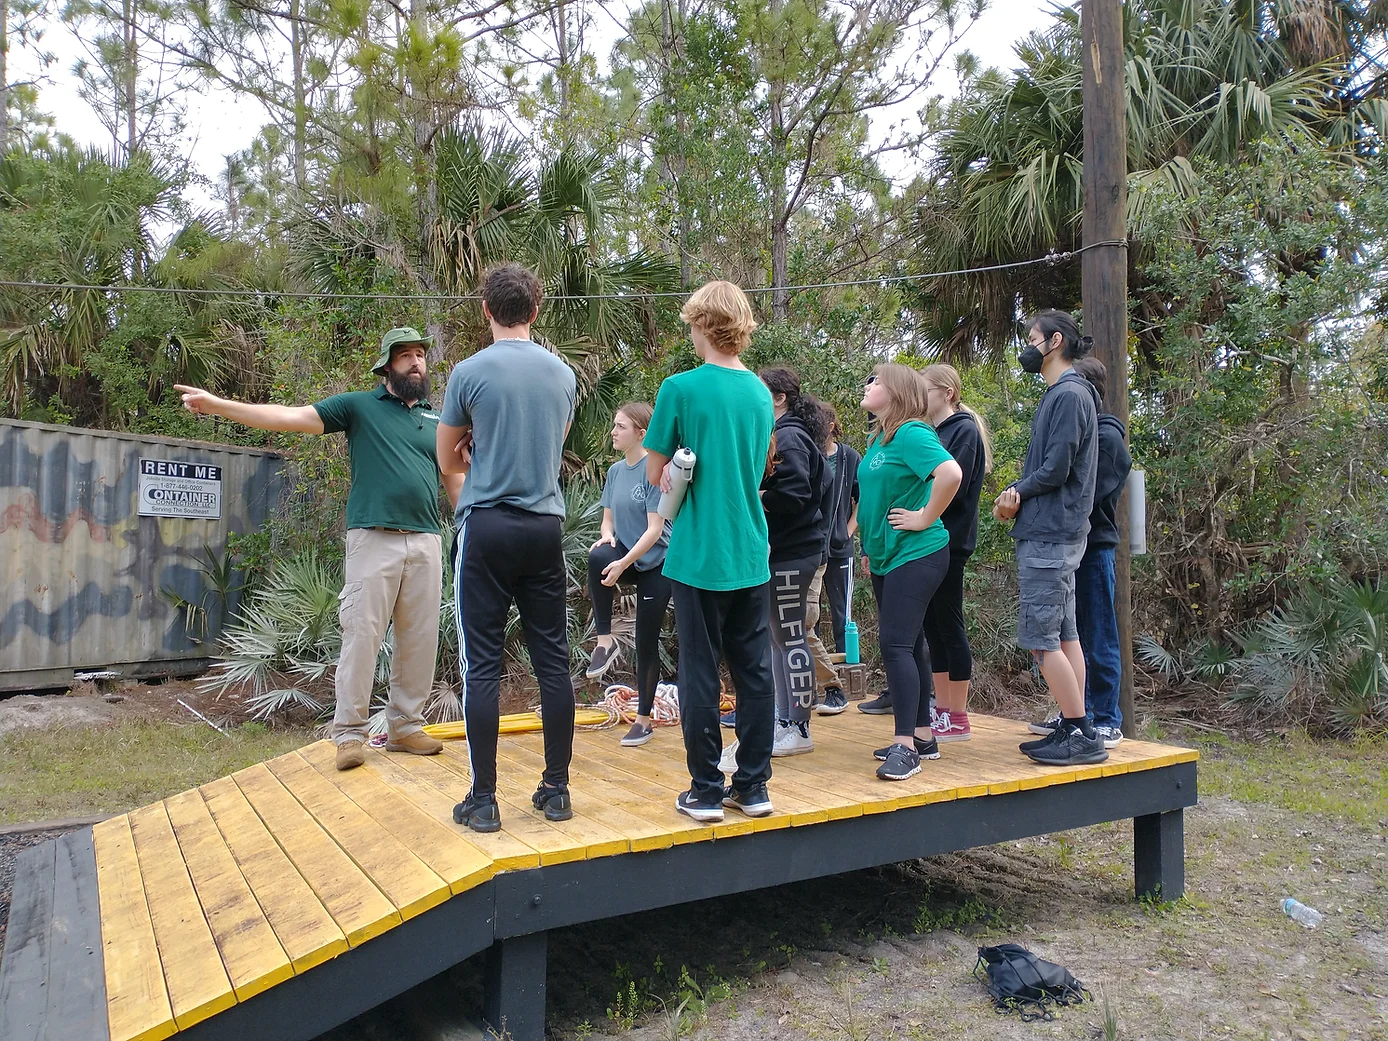 Group of students and teacher standing on a wooden structure